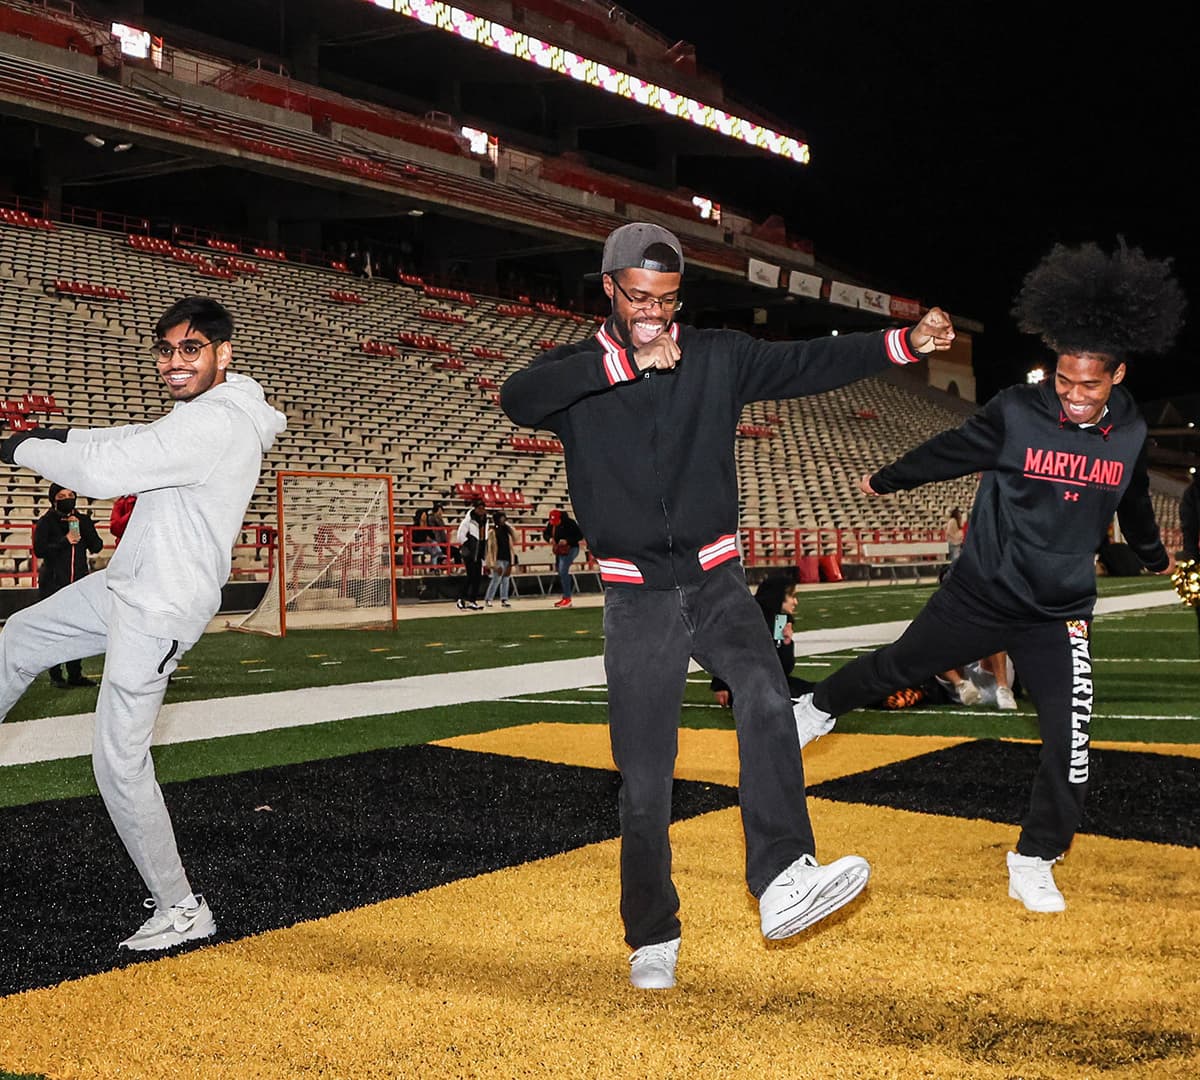 A group of three students dance in the endzone at the Tuesday Night Lights event at SECU Stadium.